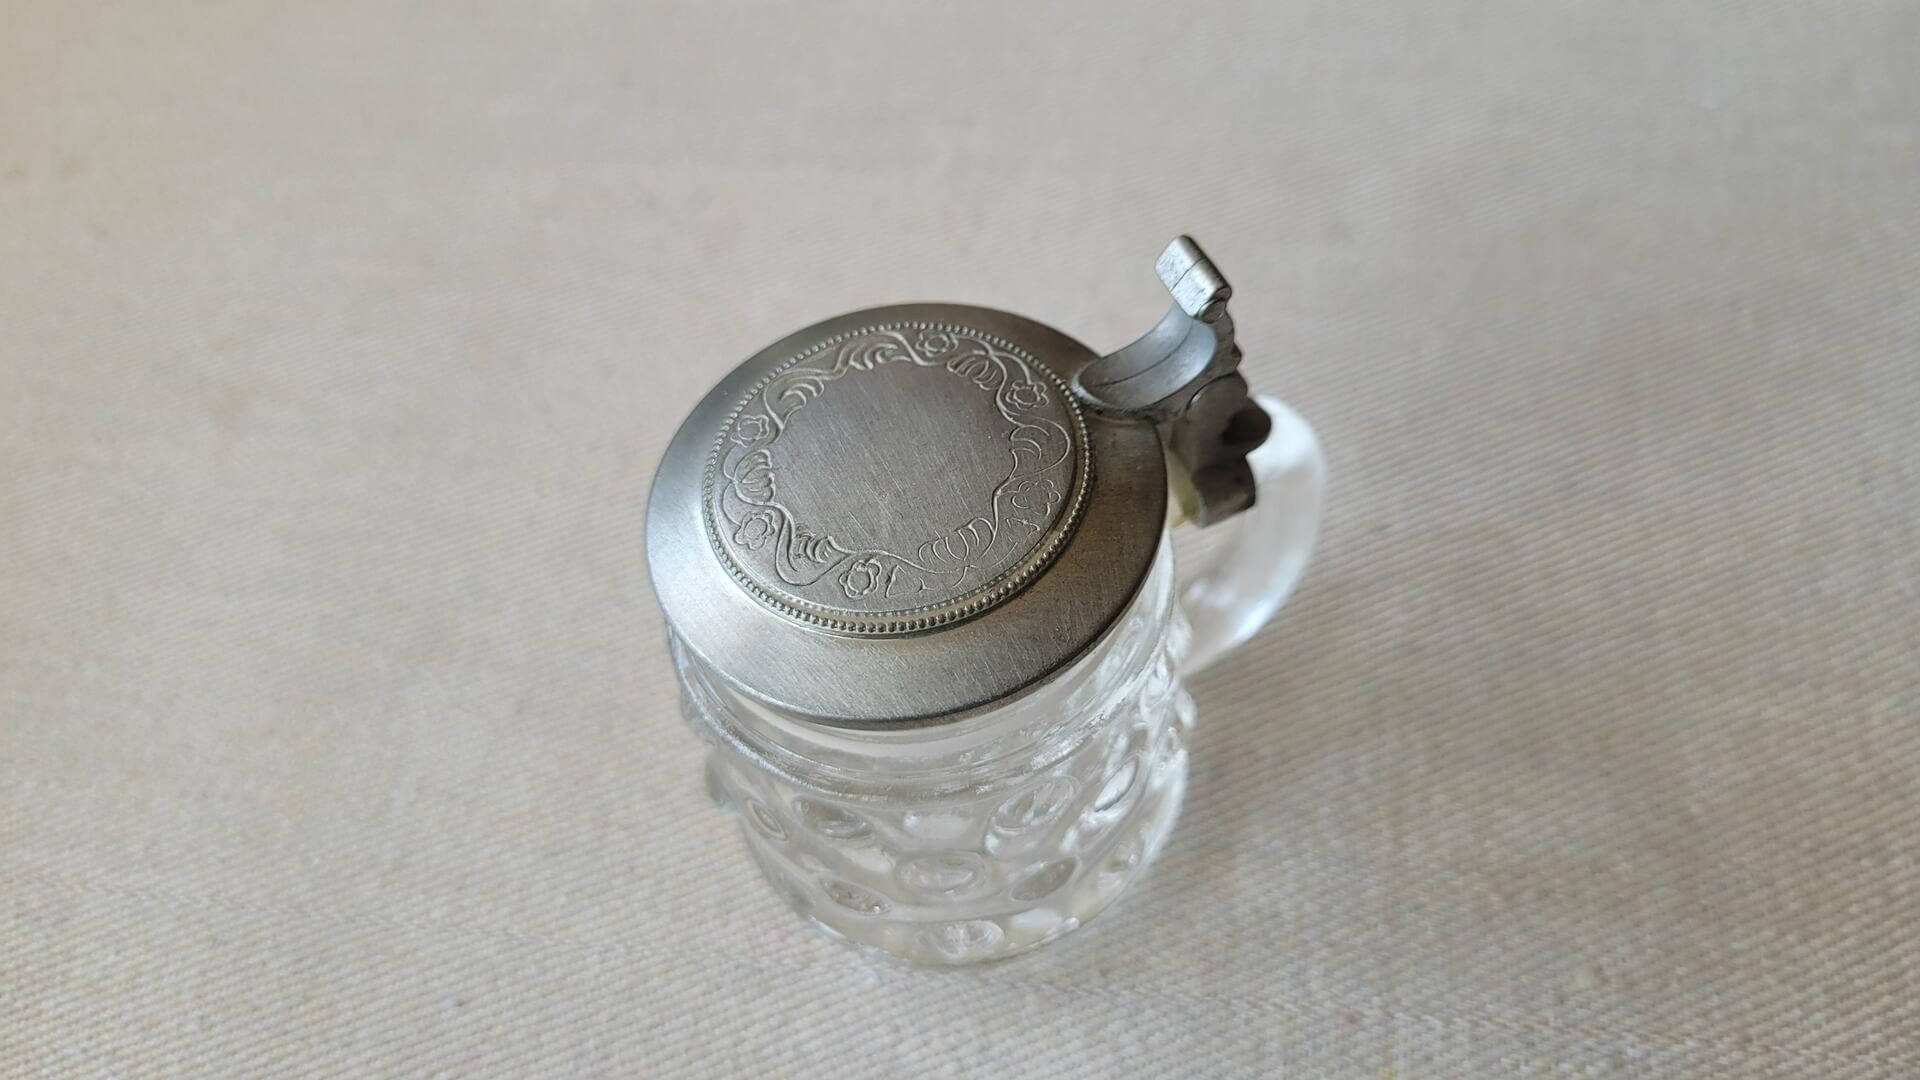 Original BMF mini steing shot glass with pewter lid. Vintage MCM made in Germany collectible drinkware and breweriana lidded mini beer stein barware piece